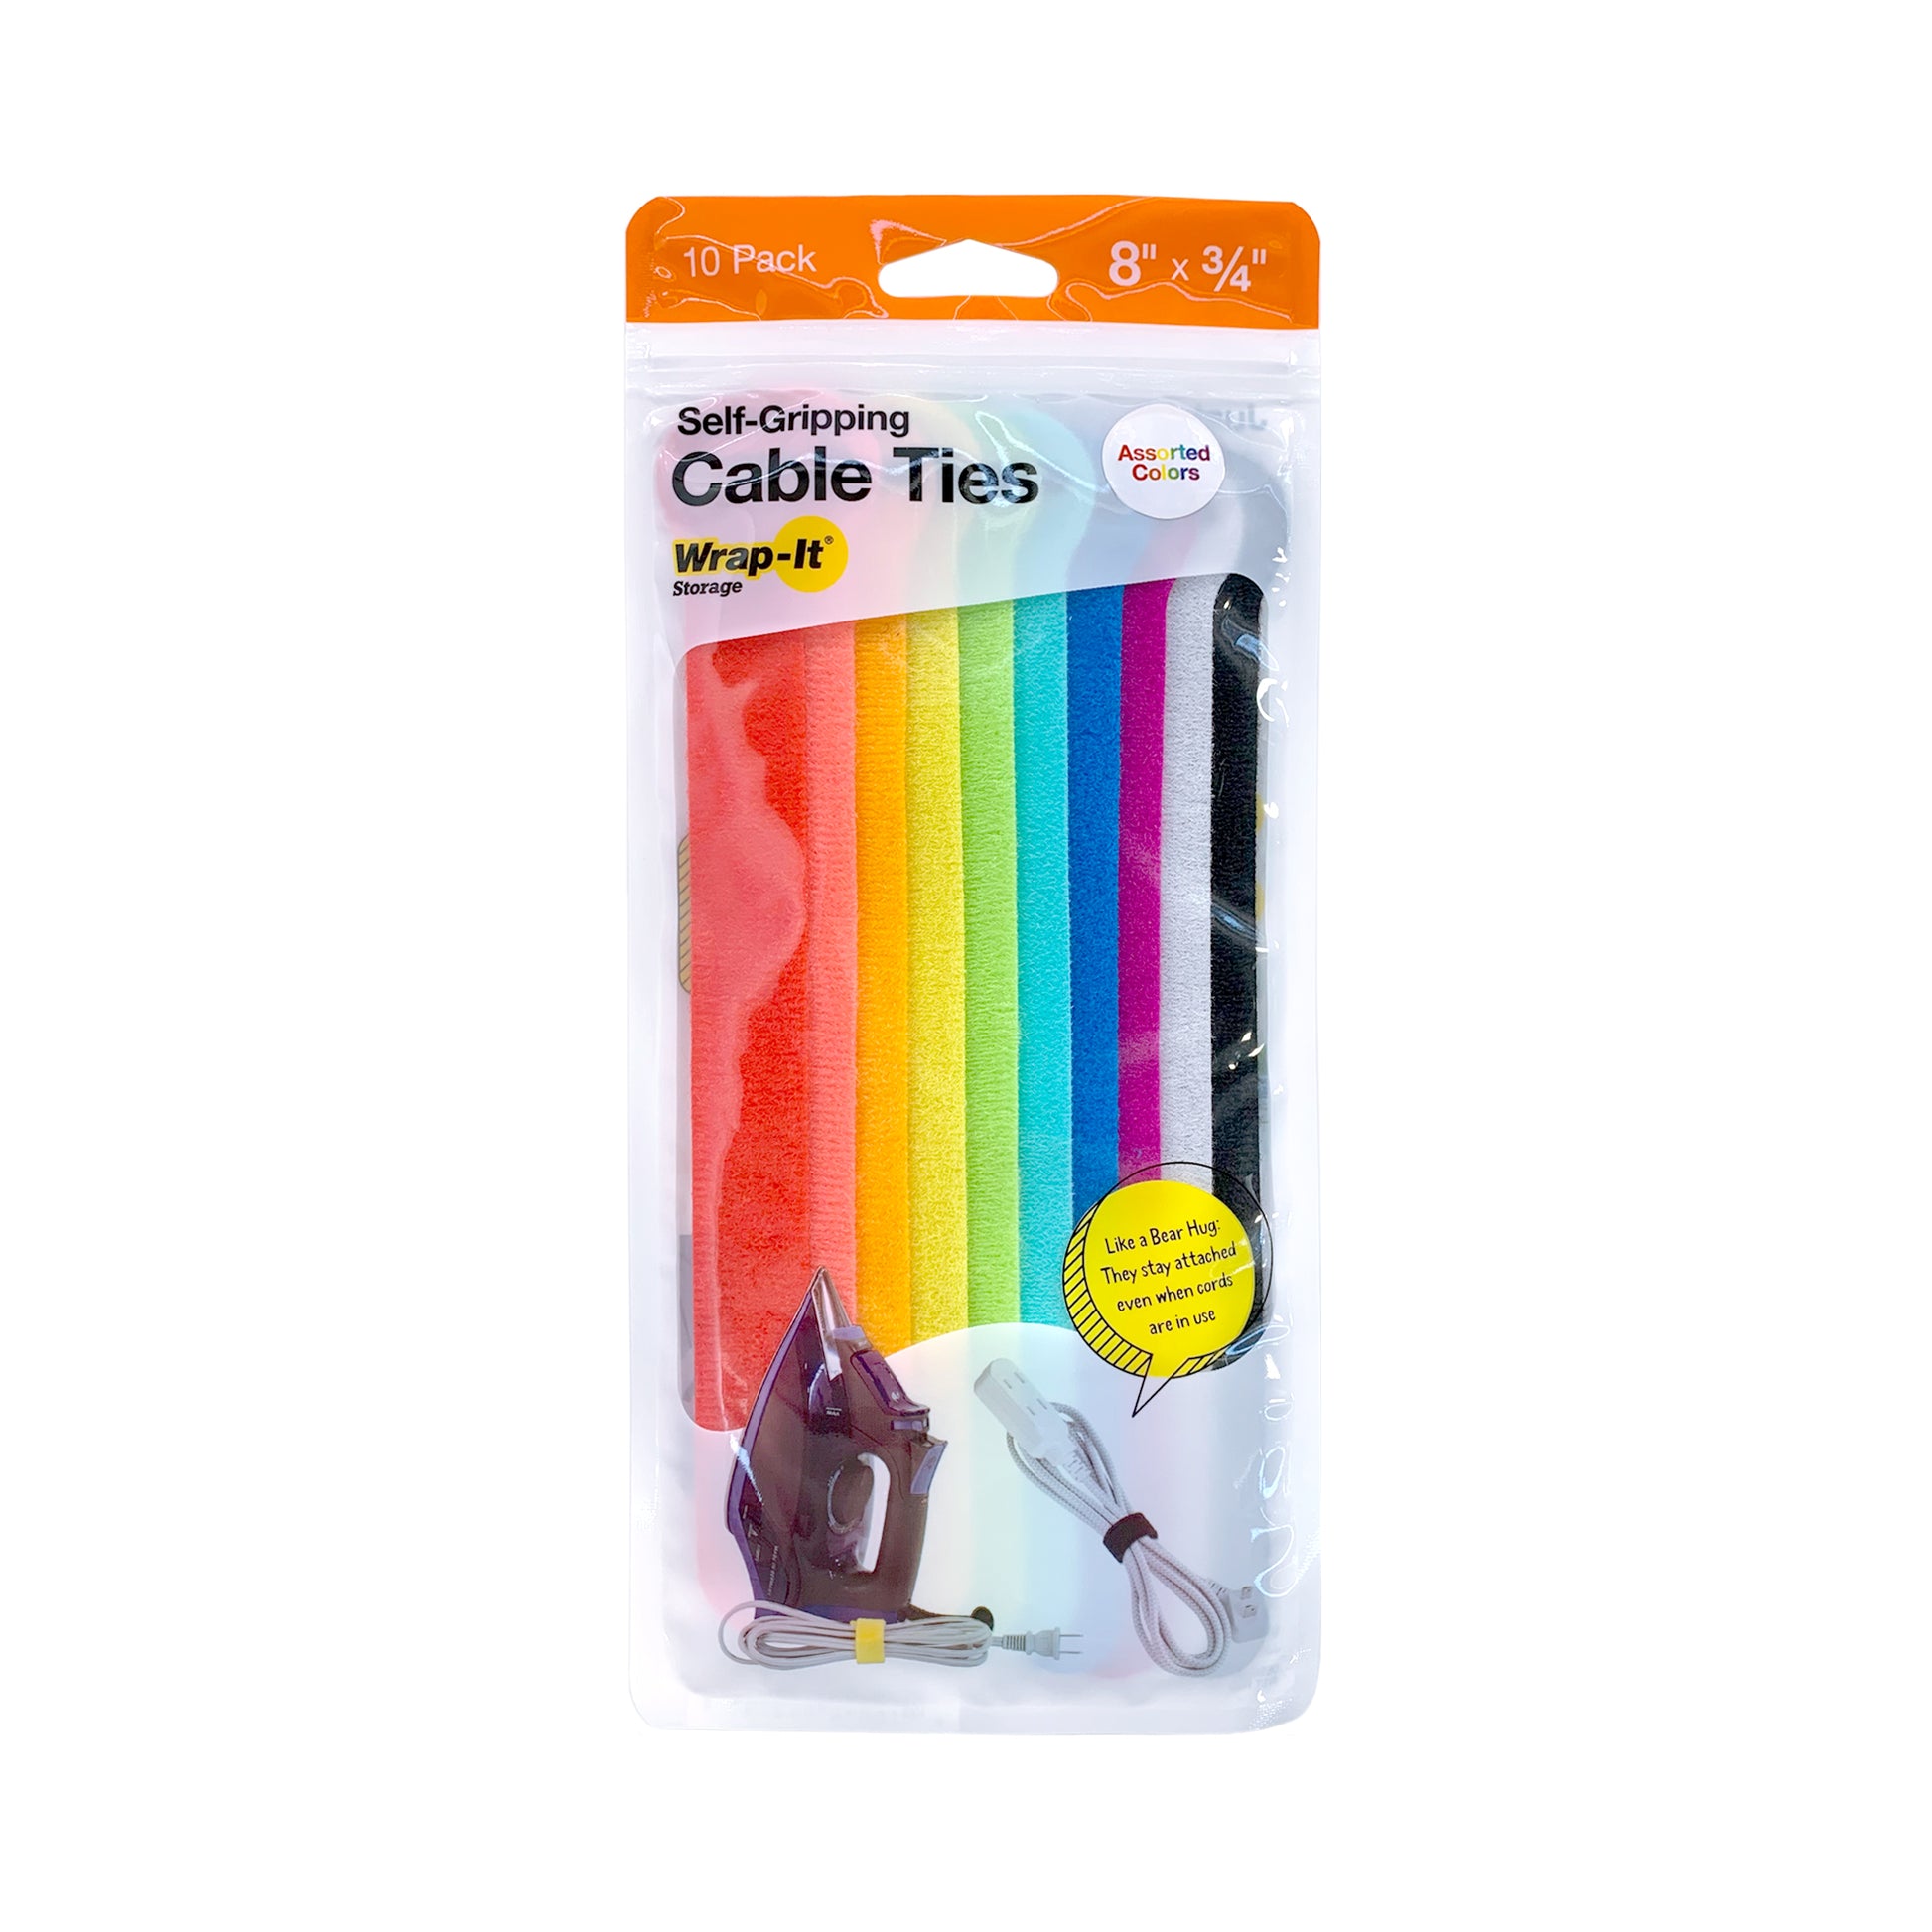 Self-Gripping Cable Ties - 8-in. (10-Pack) - Wrap-It Storage